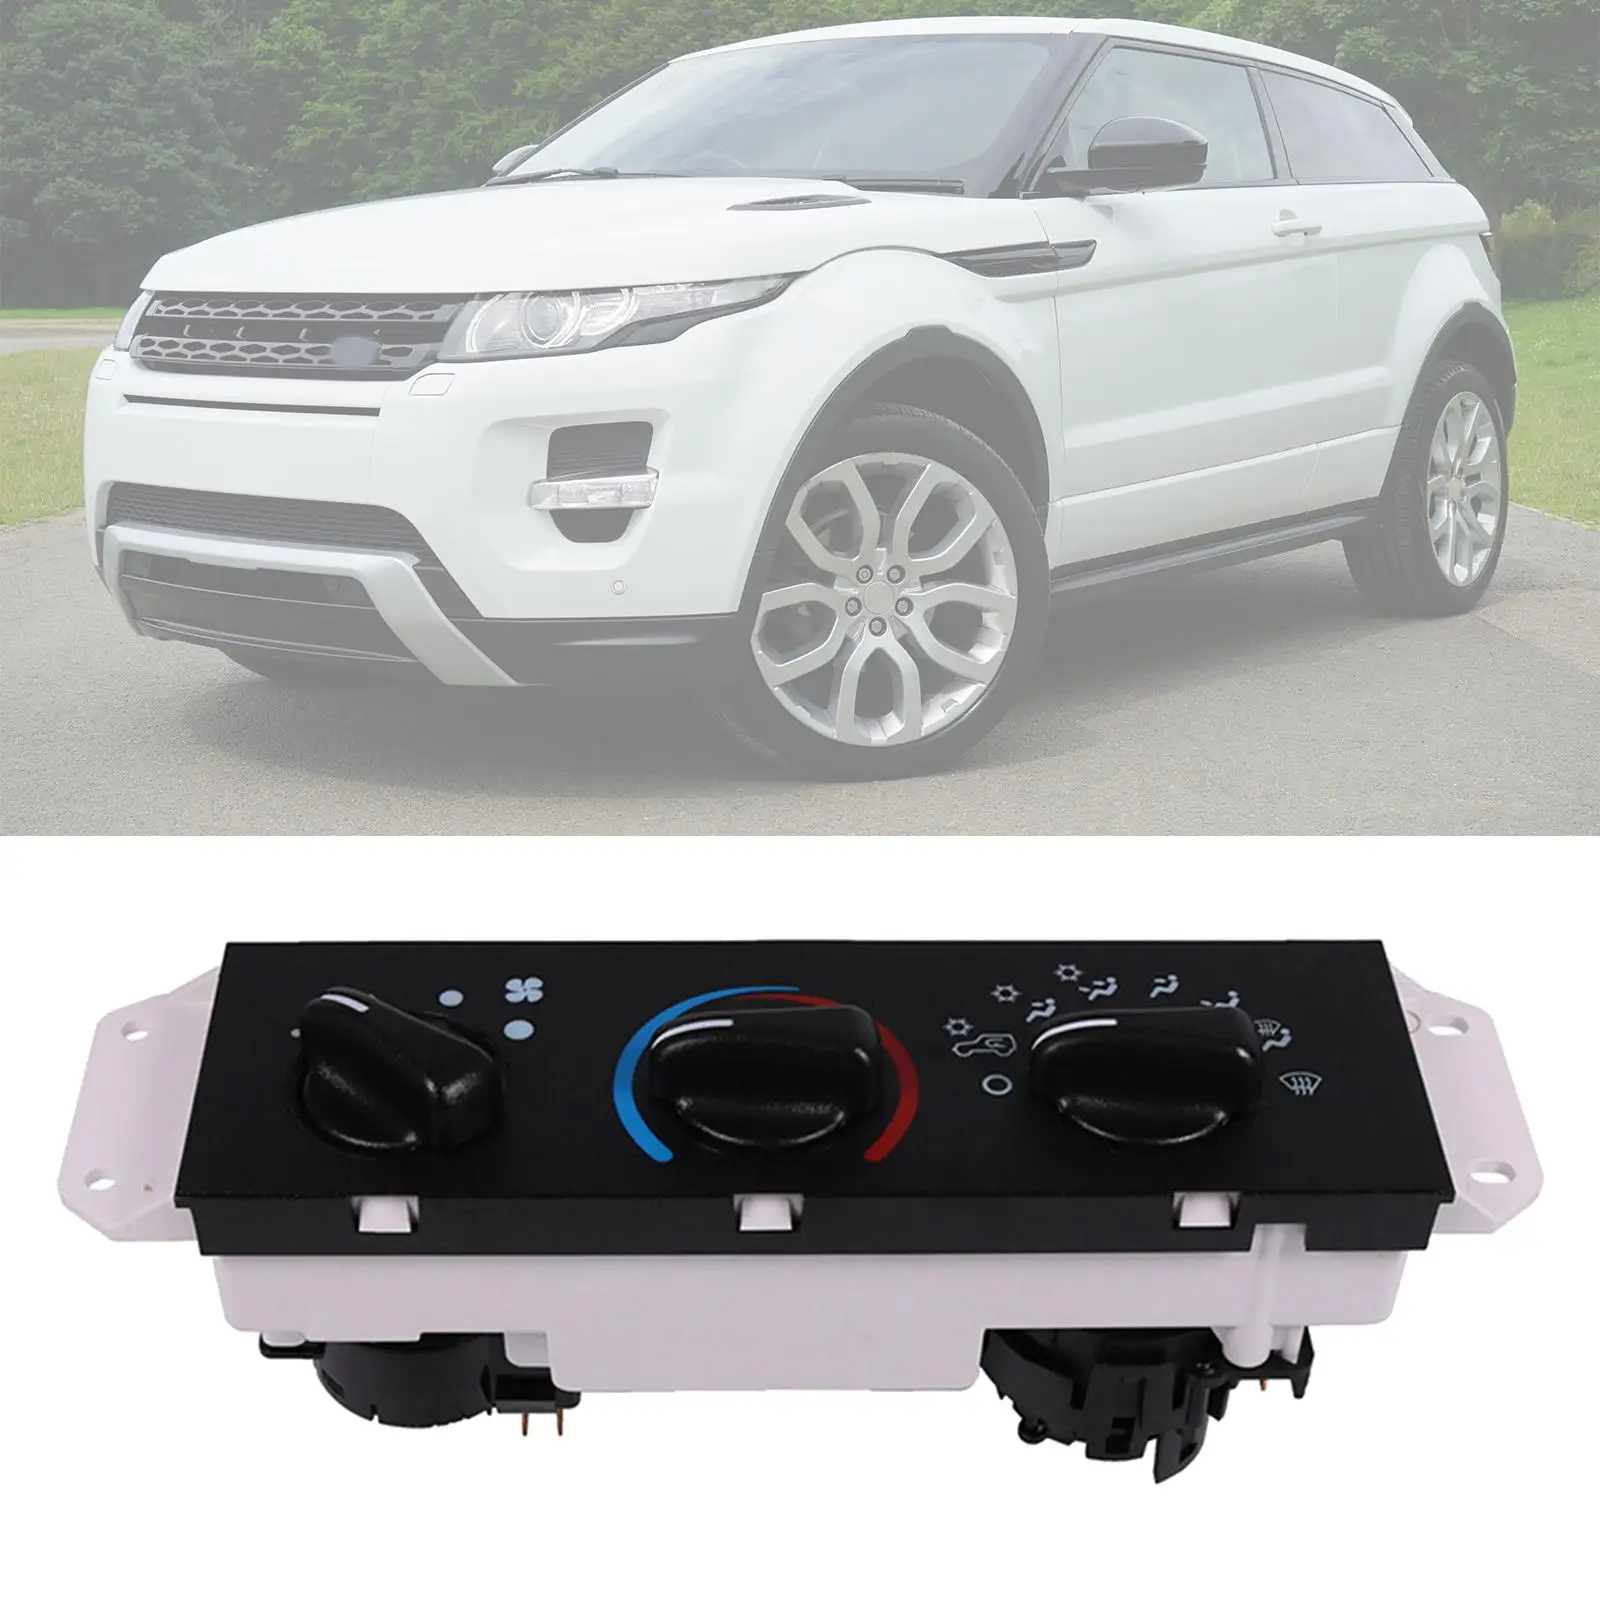 AC Heater Climate Control Switch Unit Replace Parts for Jeep